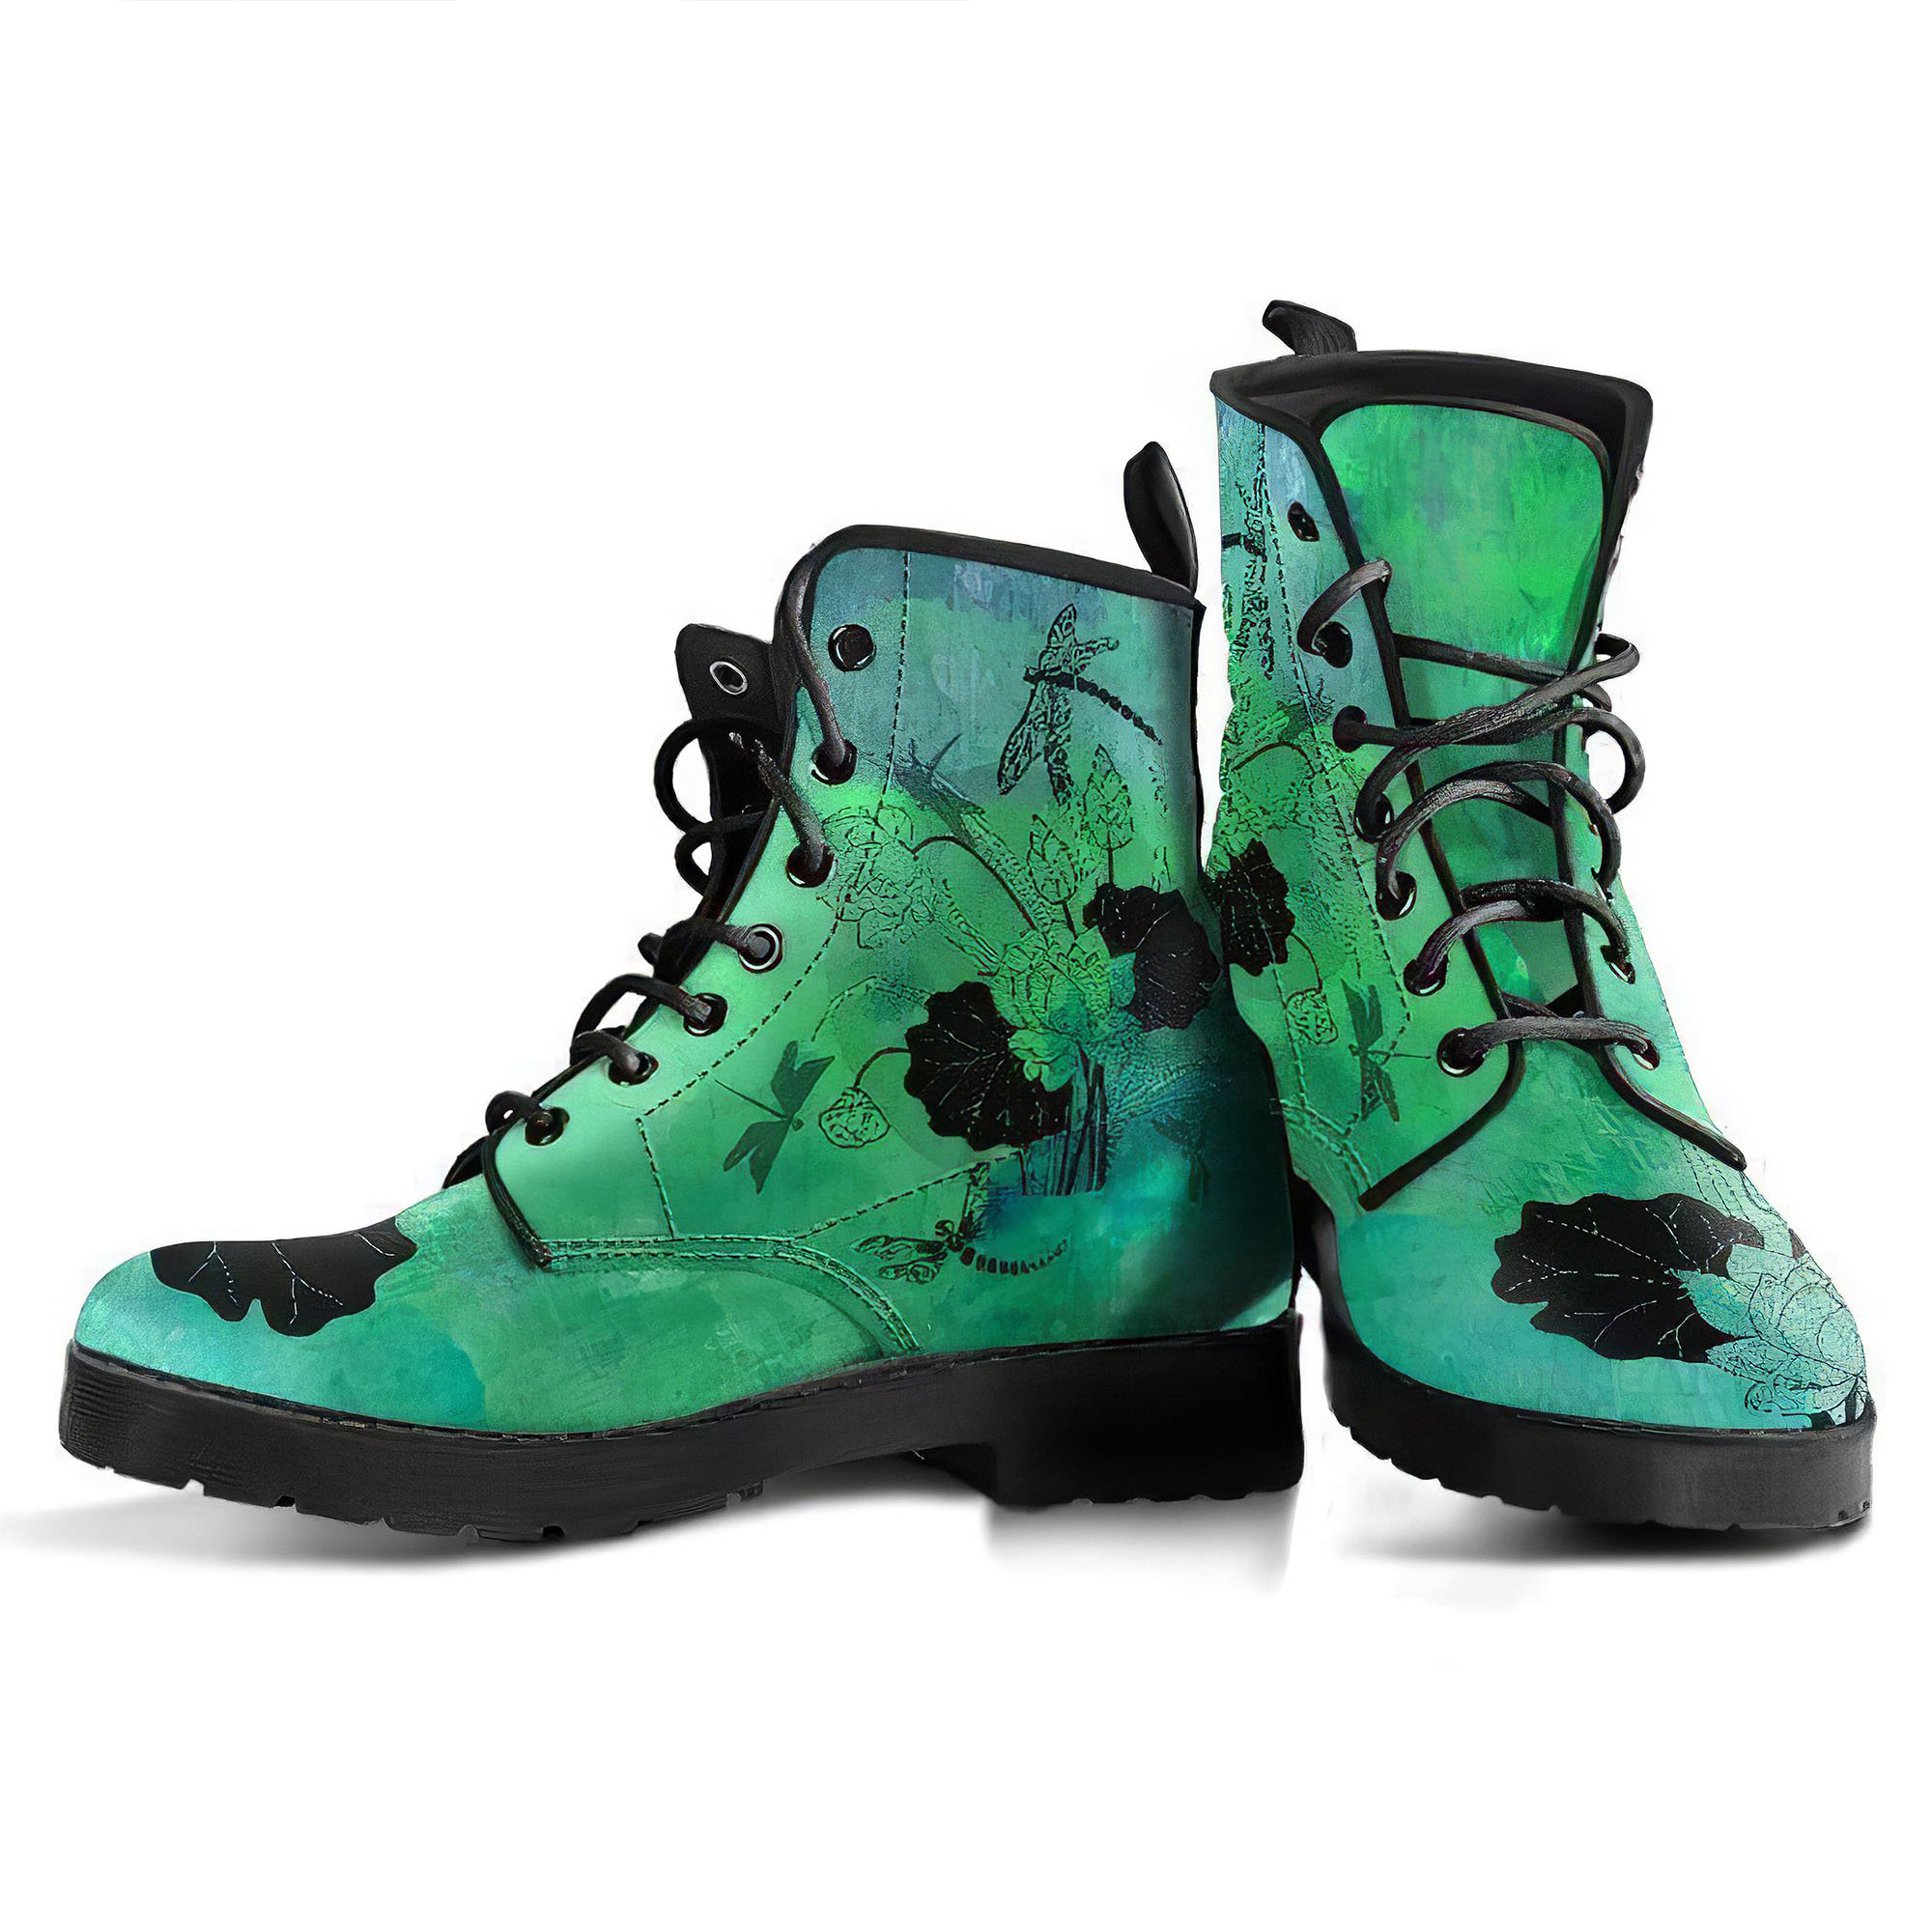 dragonfly-with-lotus-flower-handcrafted-boots-s2-gp-main.jpg